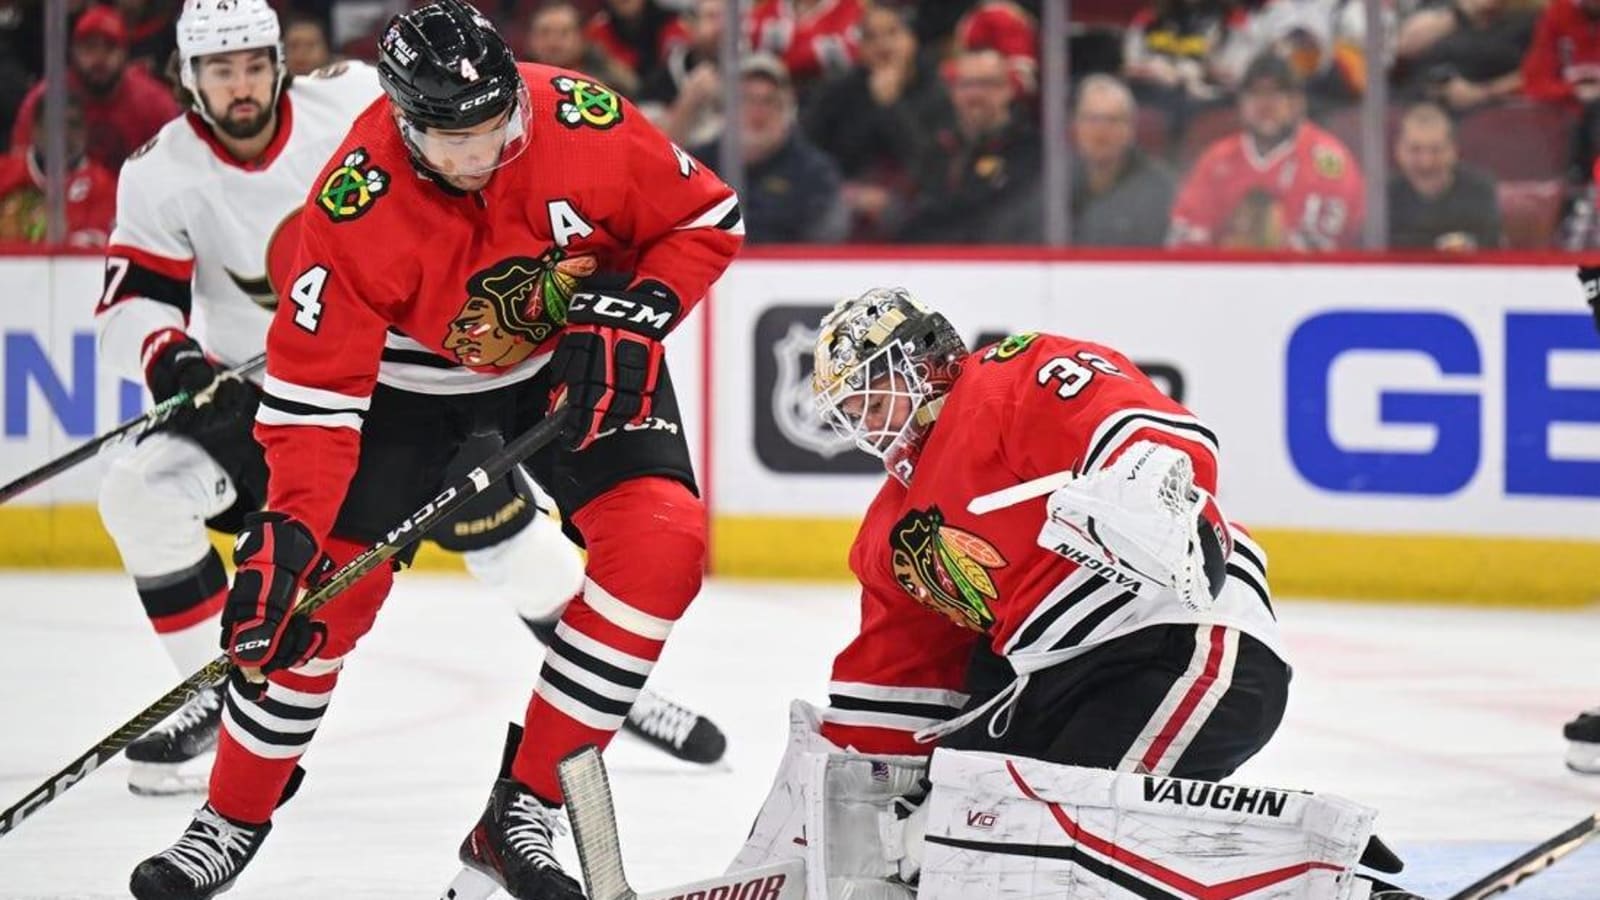 Chicago Blackhawks at Detroit Red Wings prediction, pick for 3/8: Will Hawks top sinking Wings?